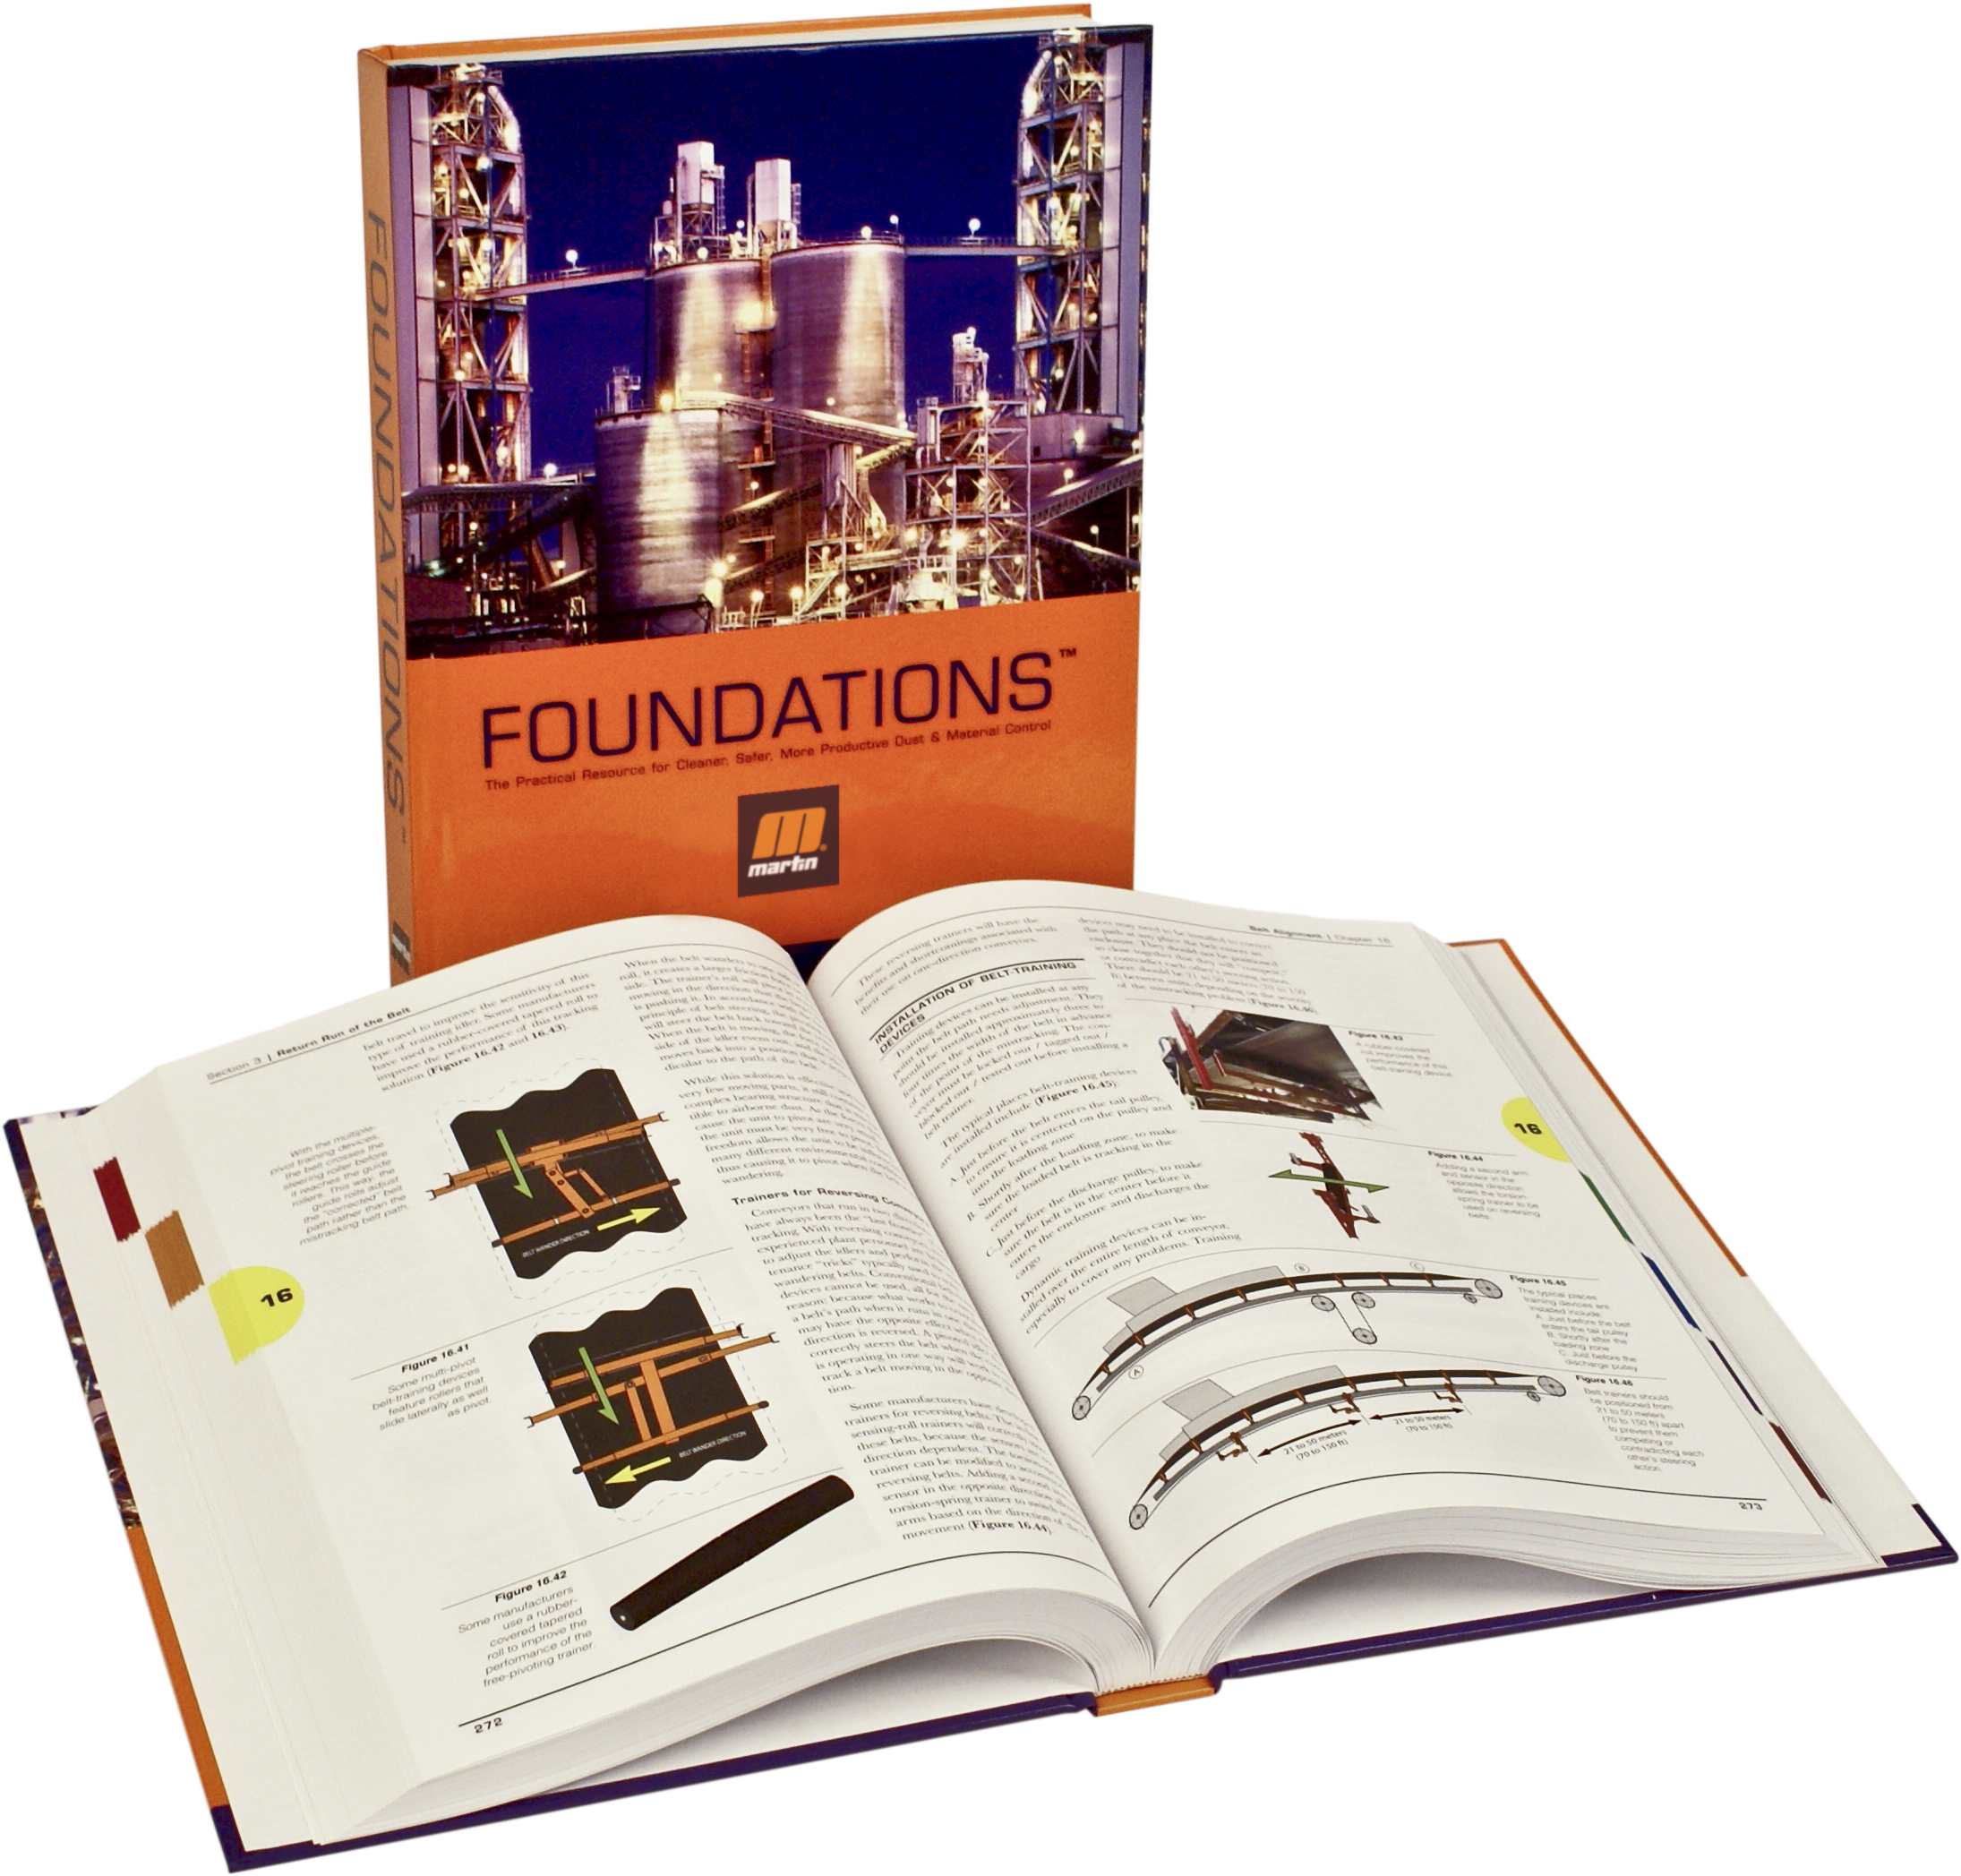 Foundations Book, Standing, Open, Laying Flat, Cut Out